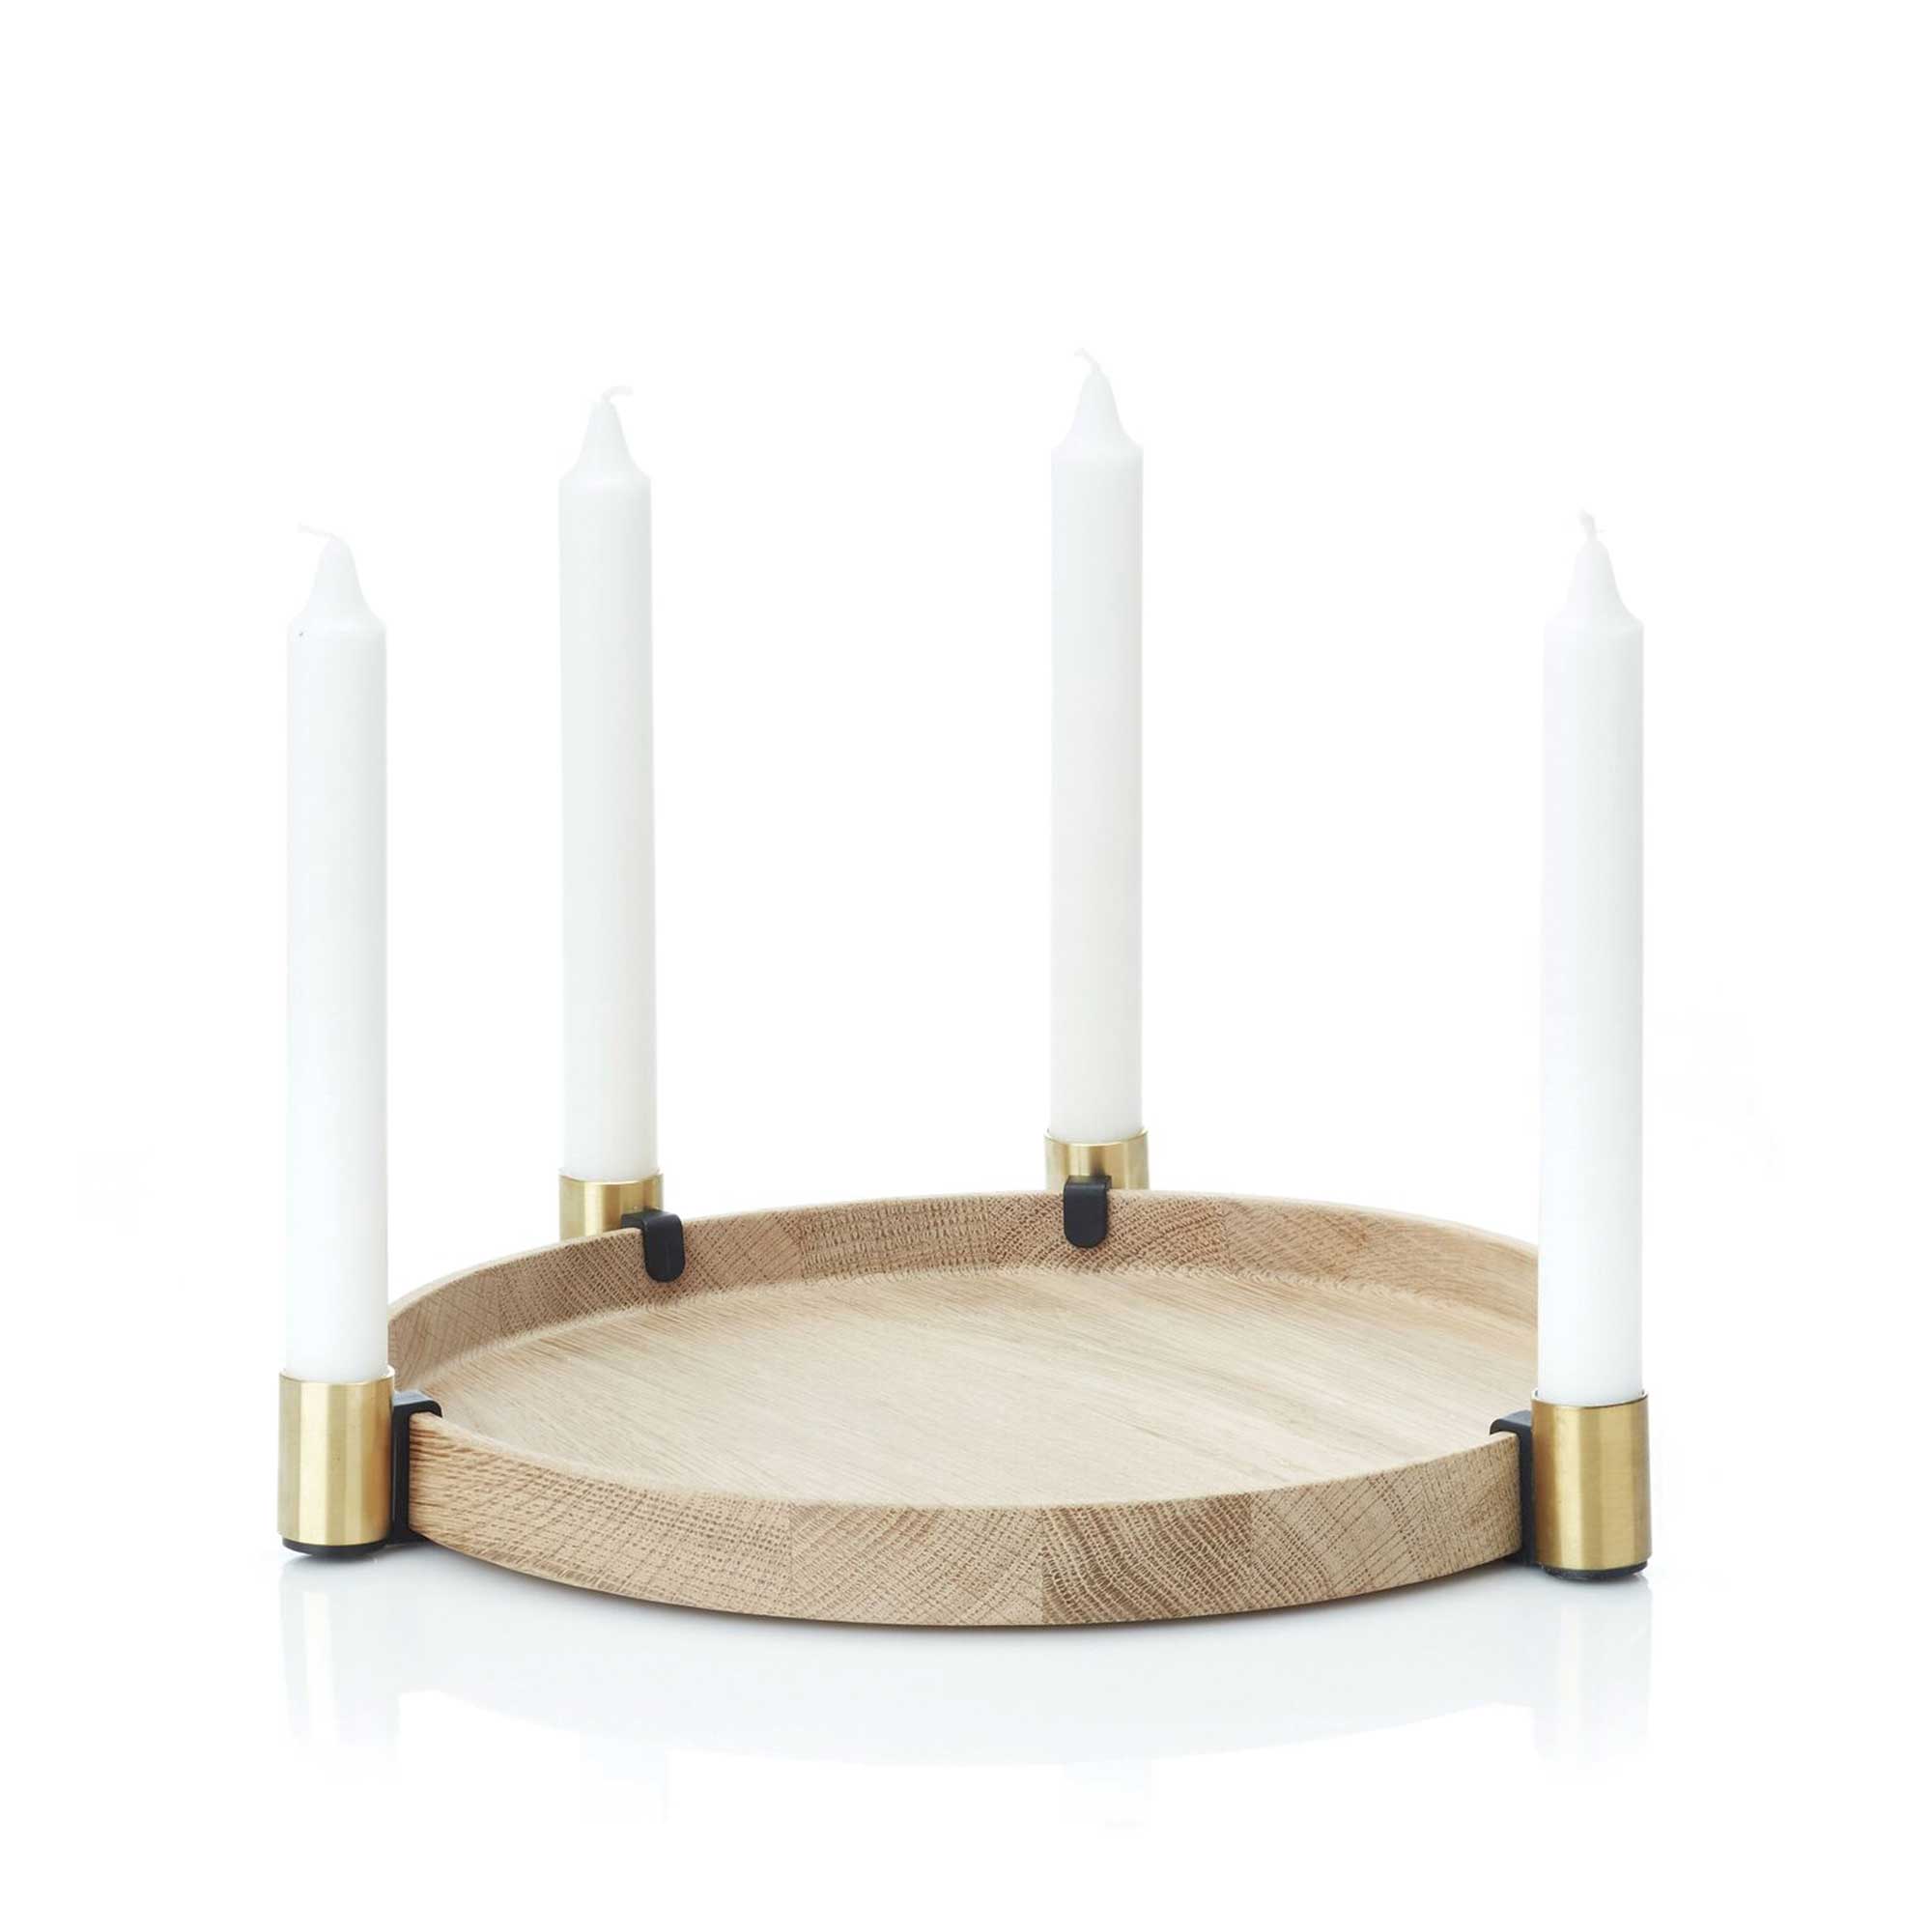 Luna Tray with Candleholders